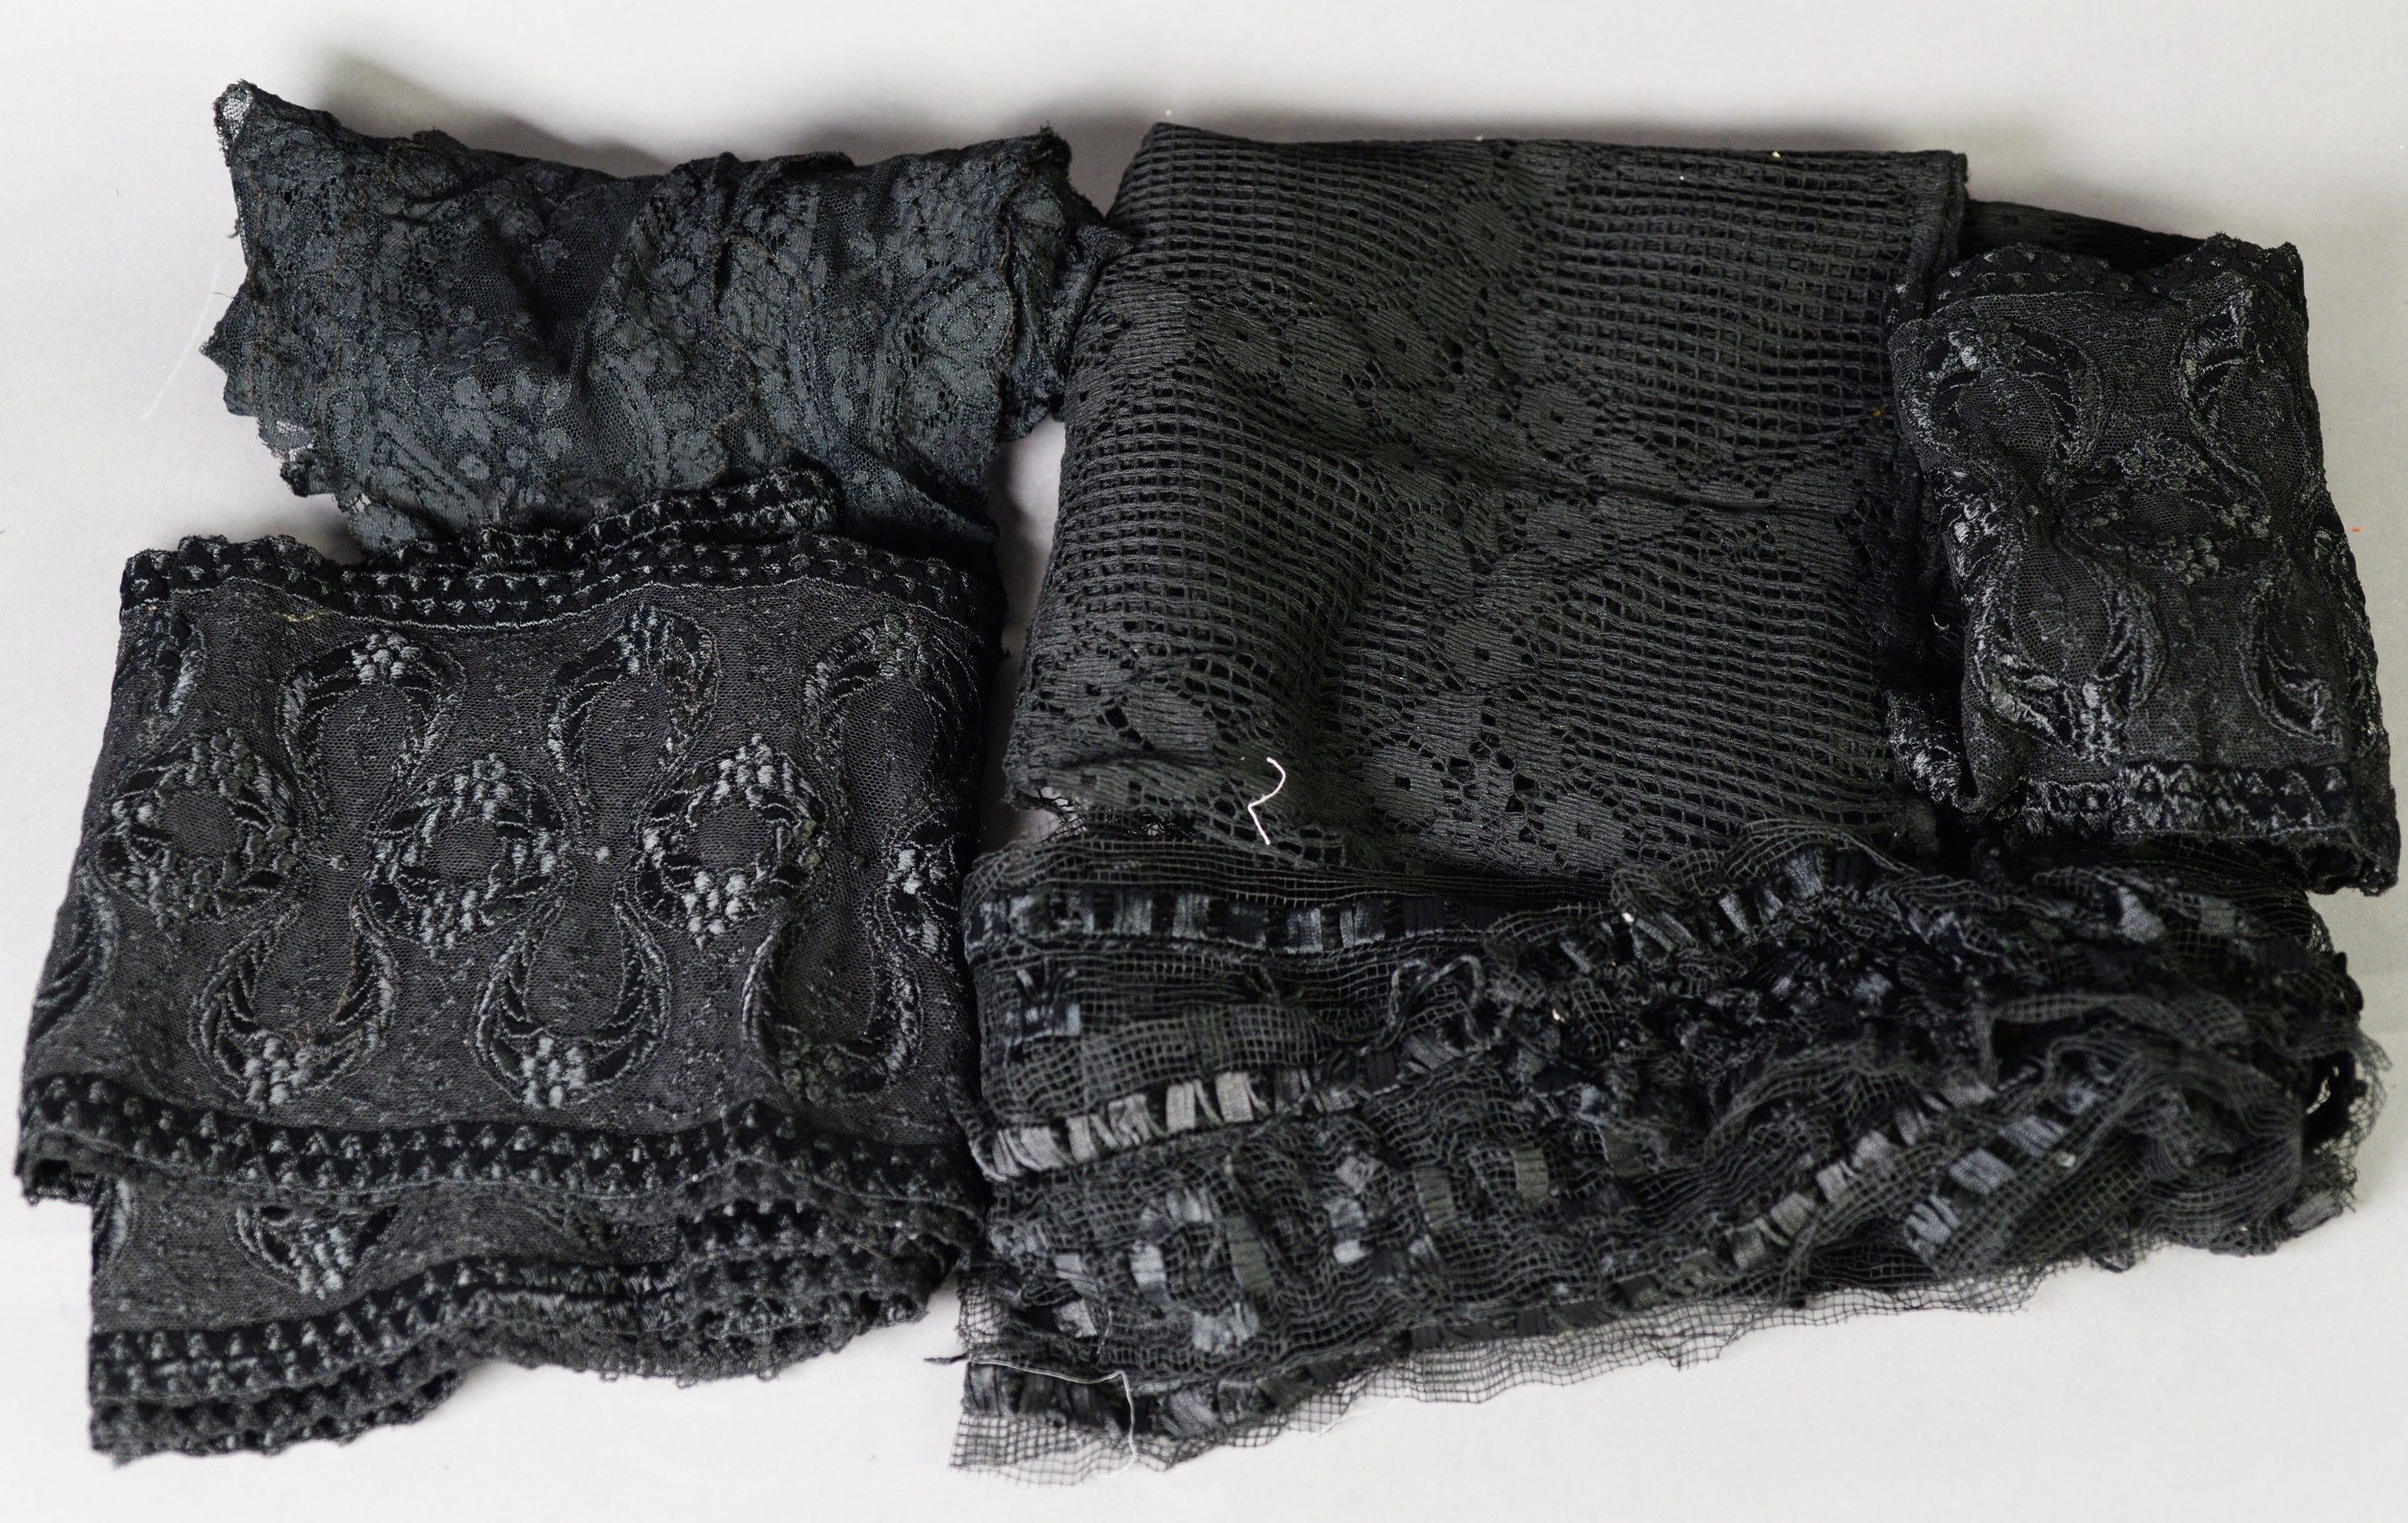 BLACK AND FLORAL PATTERN LACE SHAWL of long triangular form; a QUANTITY OF BLACK LACE, one item of